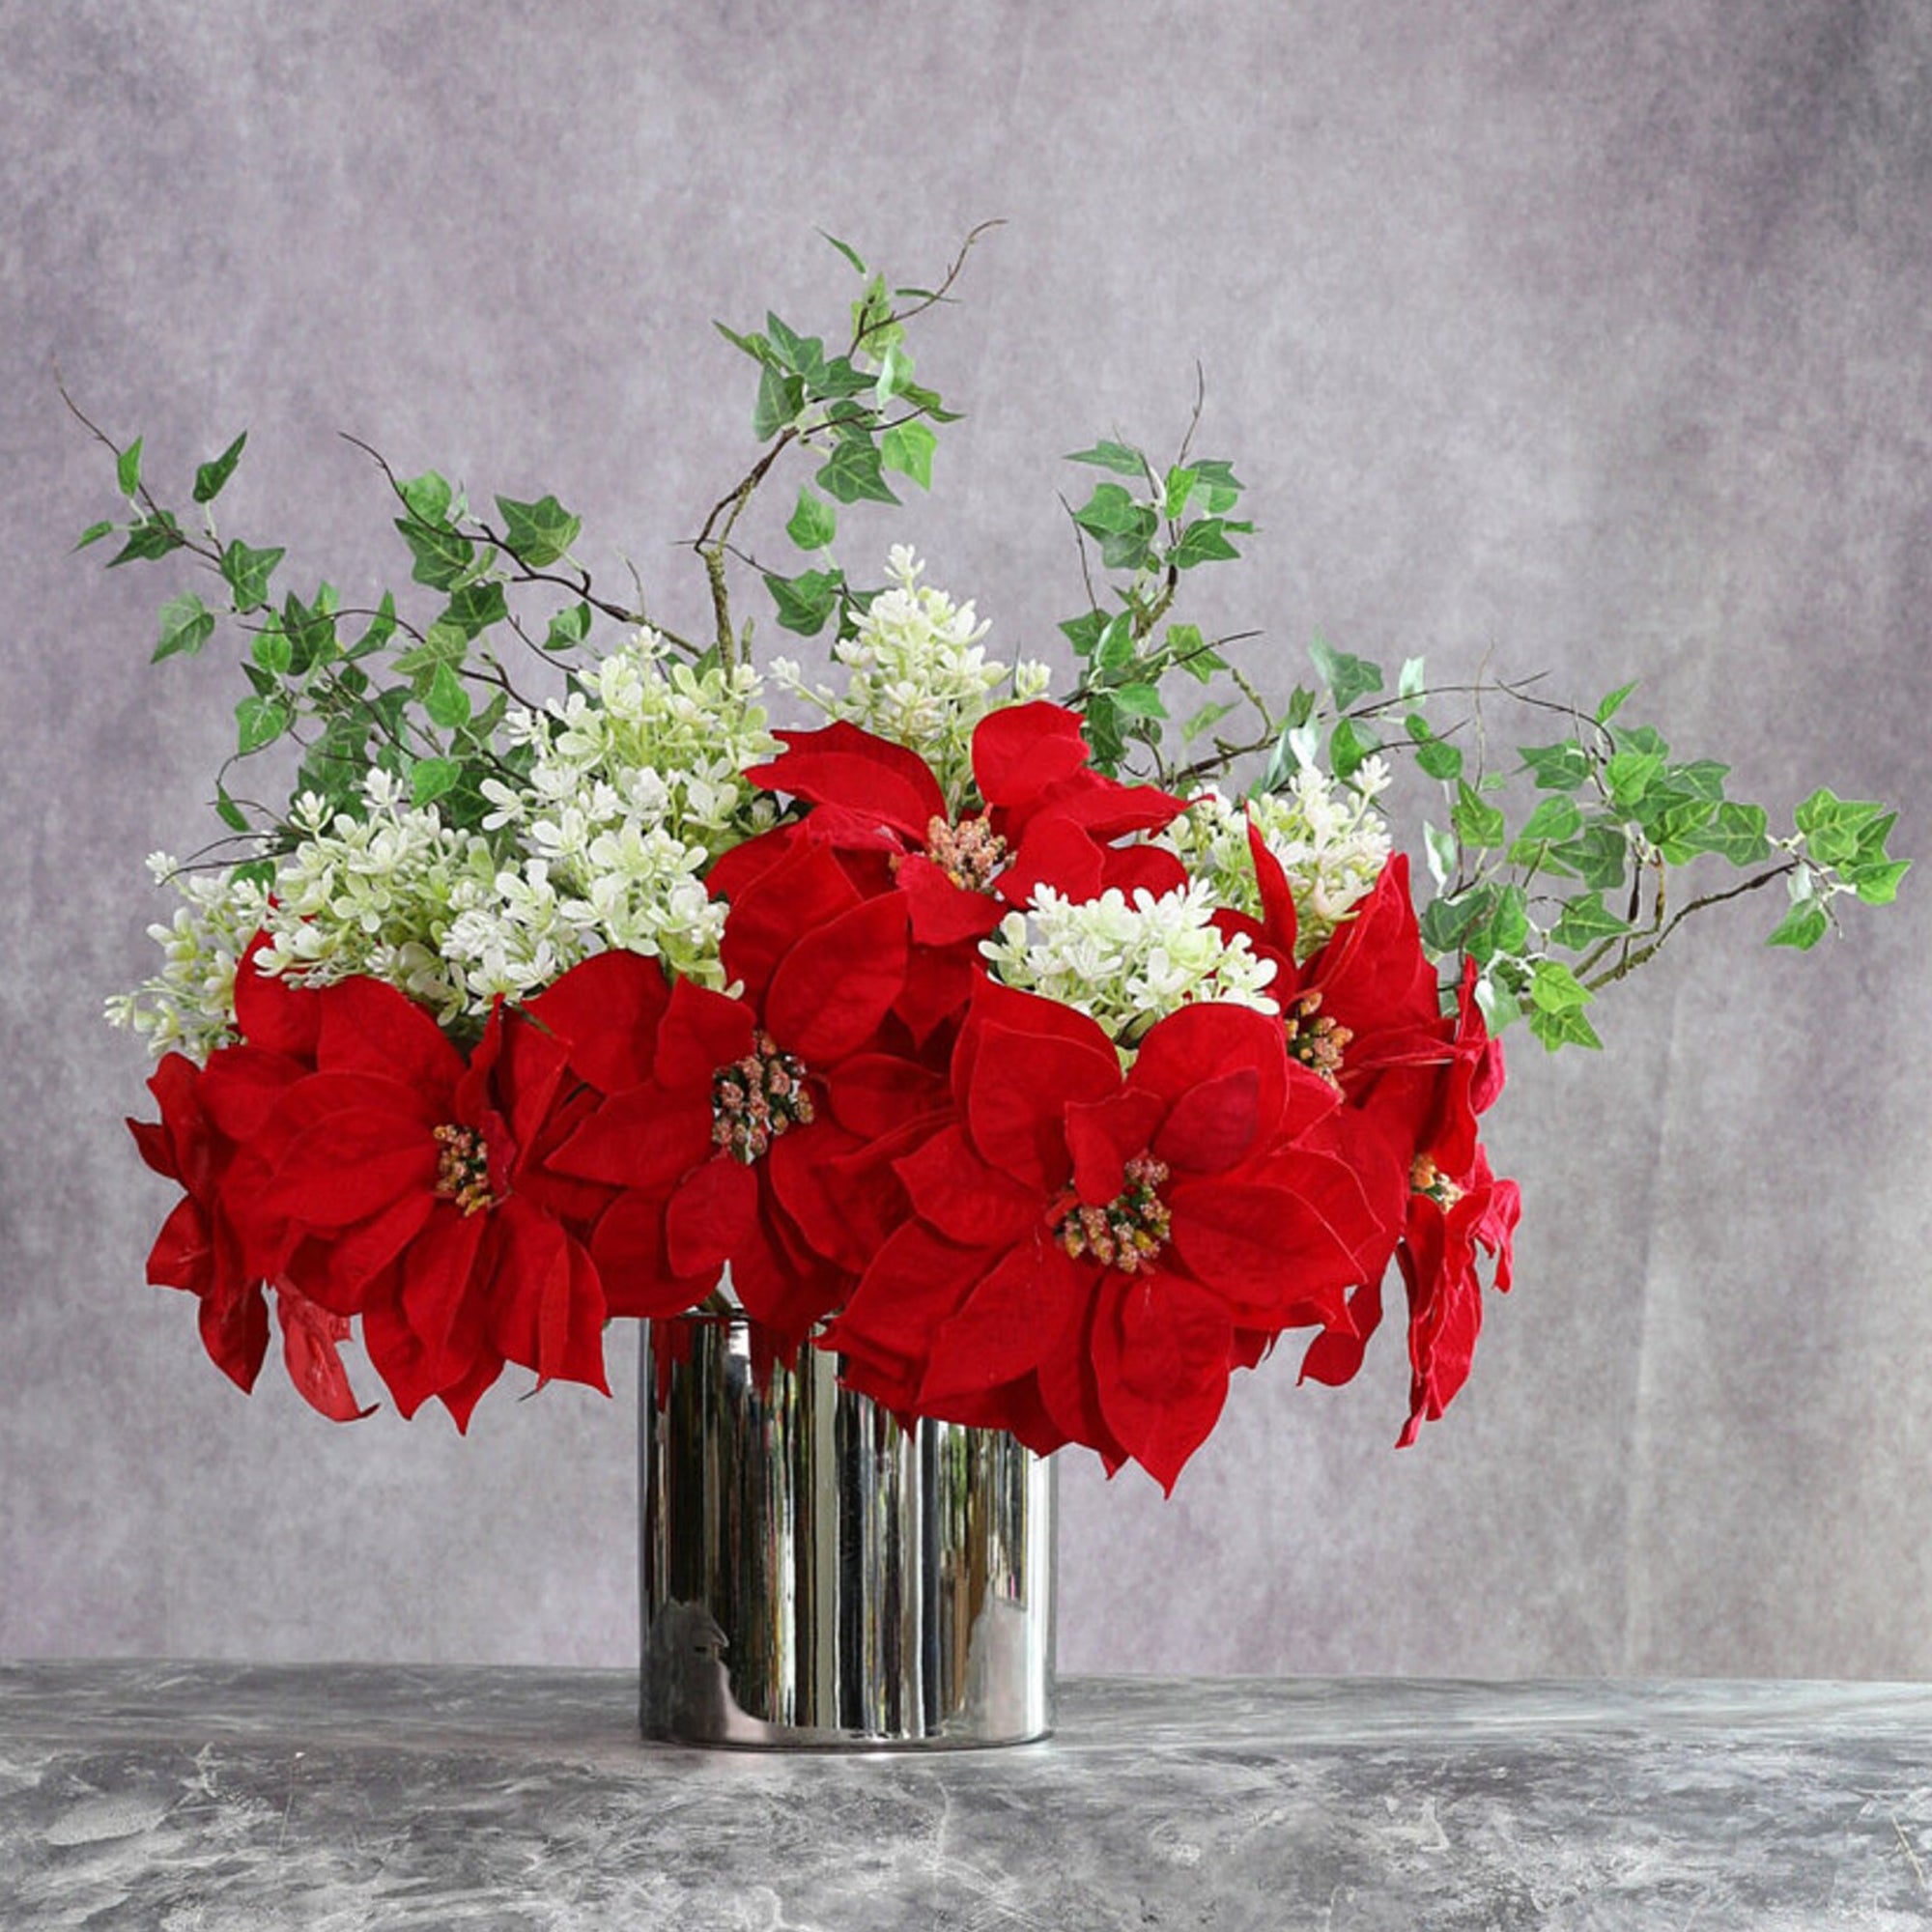 Artificial Red Poinsettia Individual Flowers 12.6"